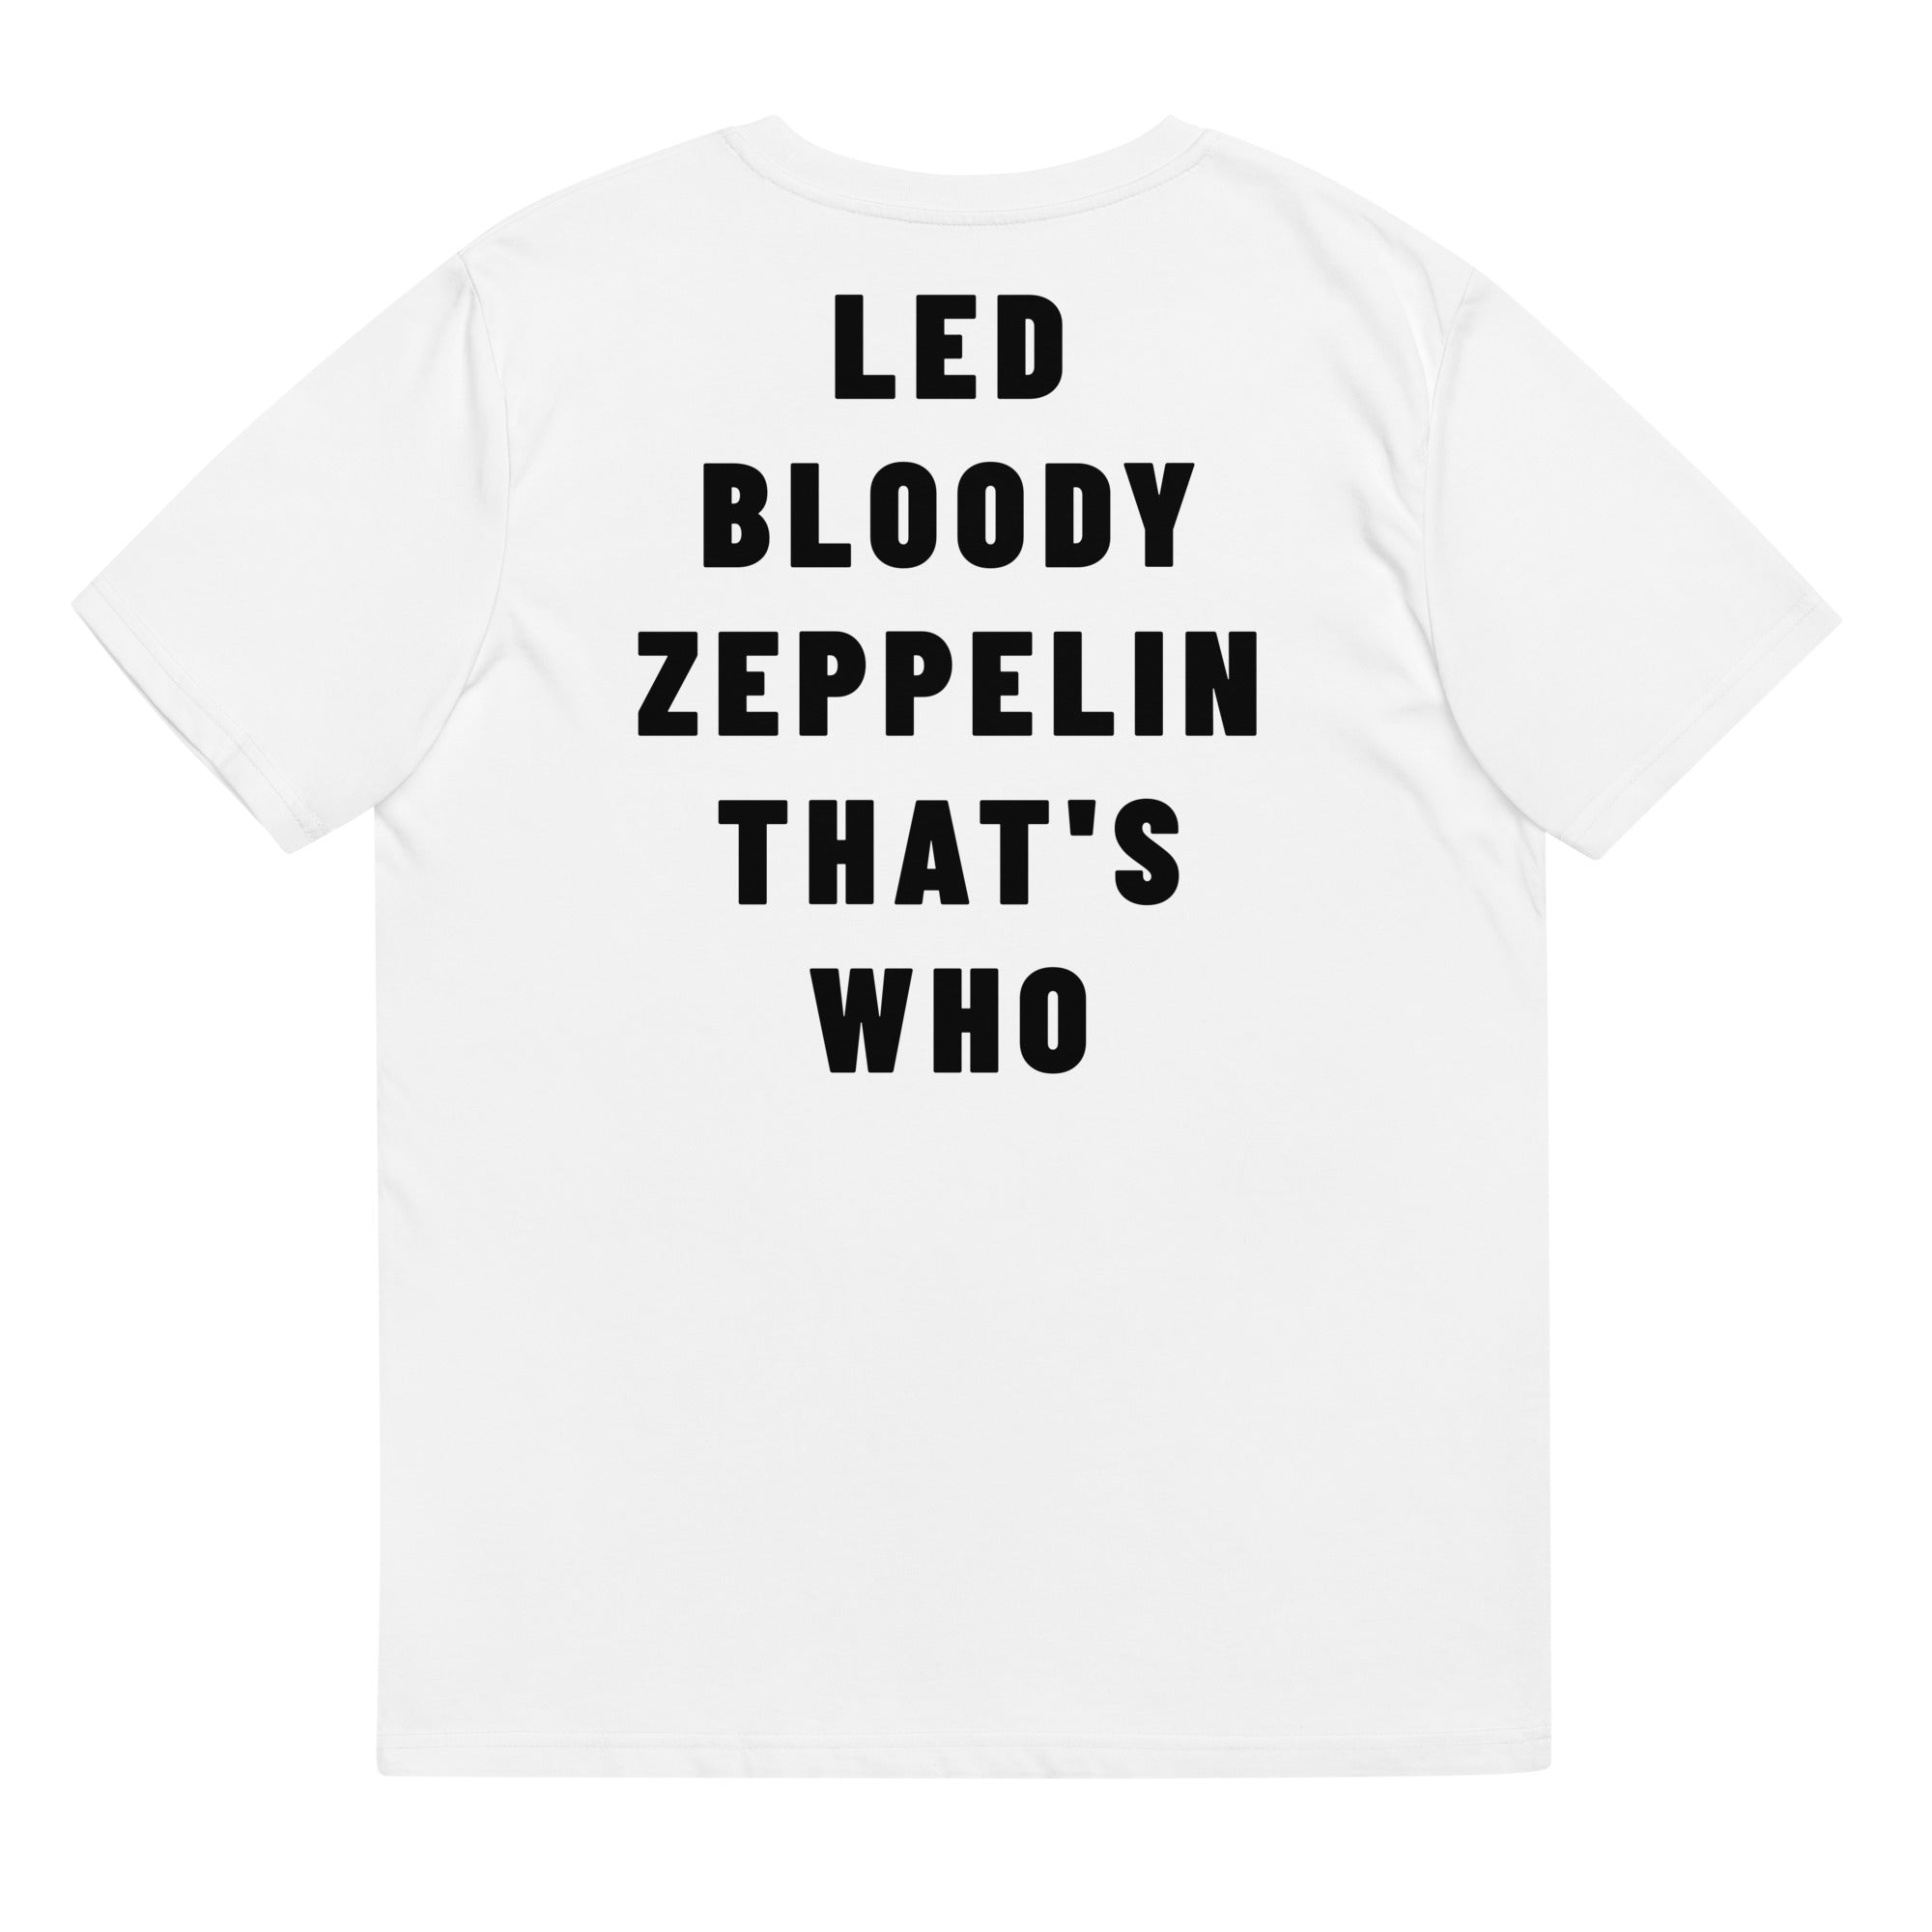 LED BLOODY ZEPPELIN THAT'S WHO Printed Unisex Organic Cotton T-shirt